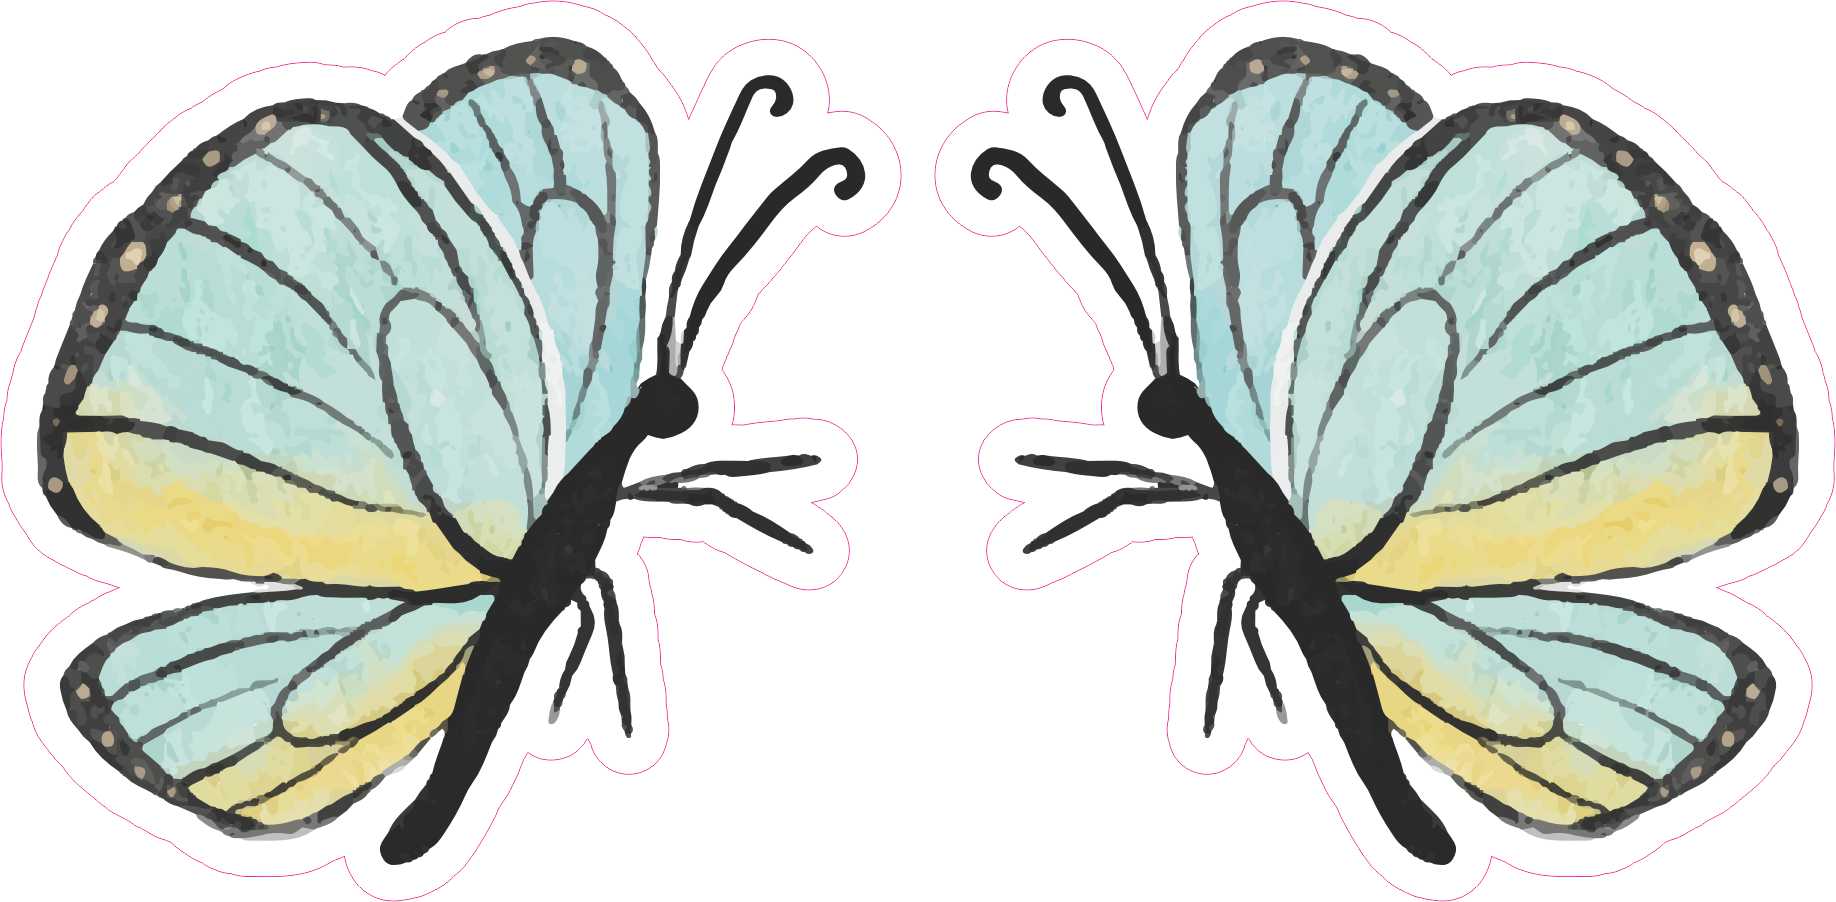 StickerTalk Mirrored Blue Watercolor Butterfly Stickers, 3 Inches x 3 Inches